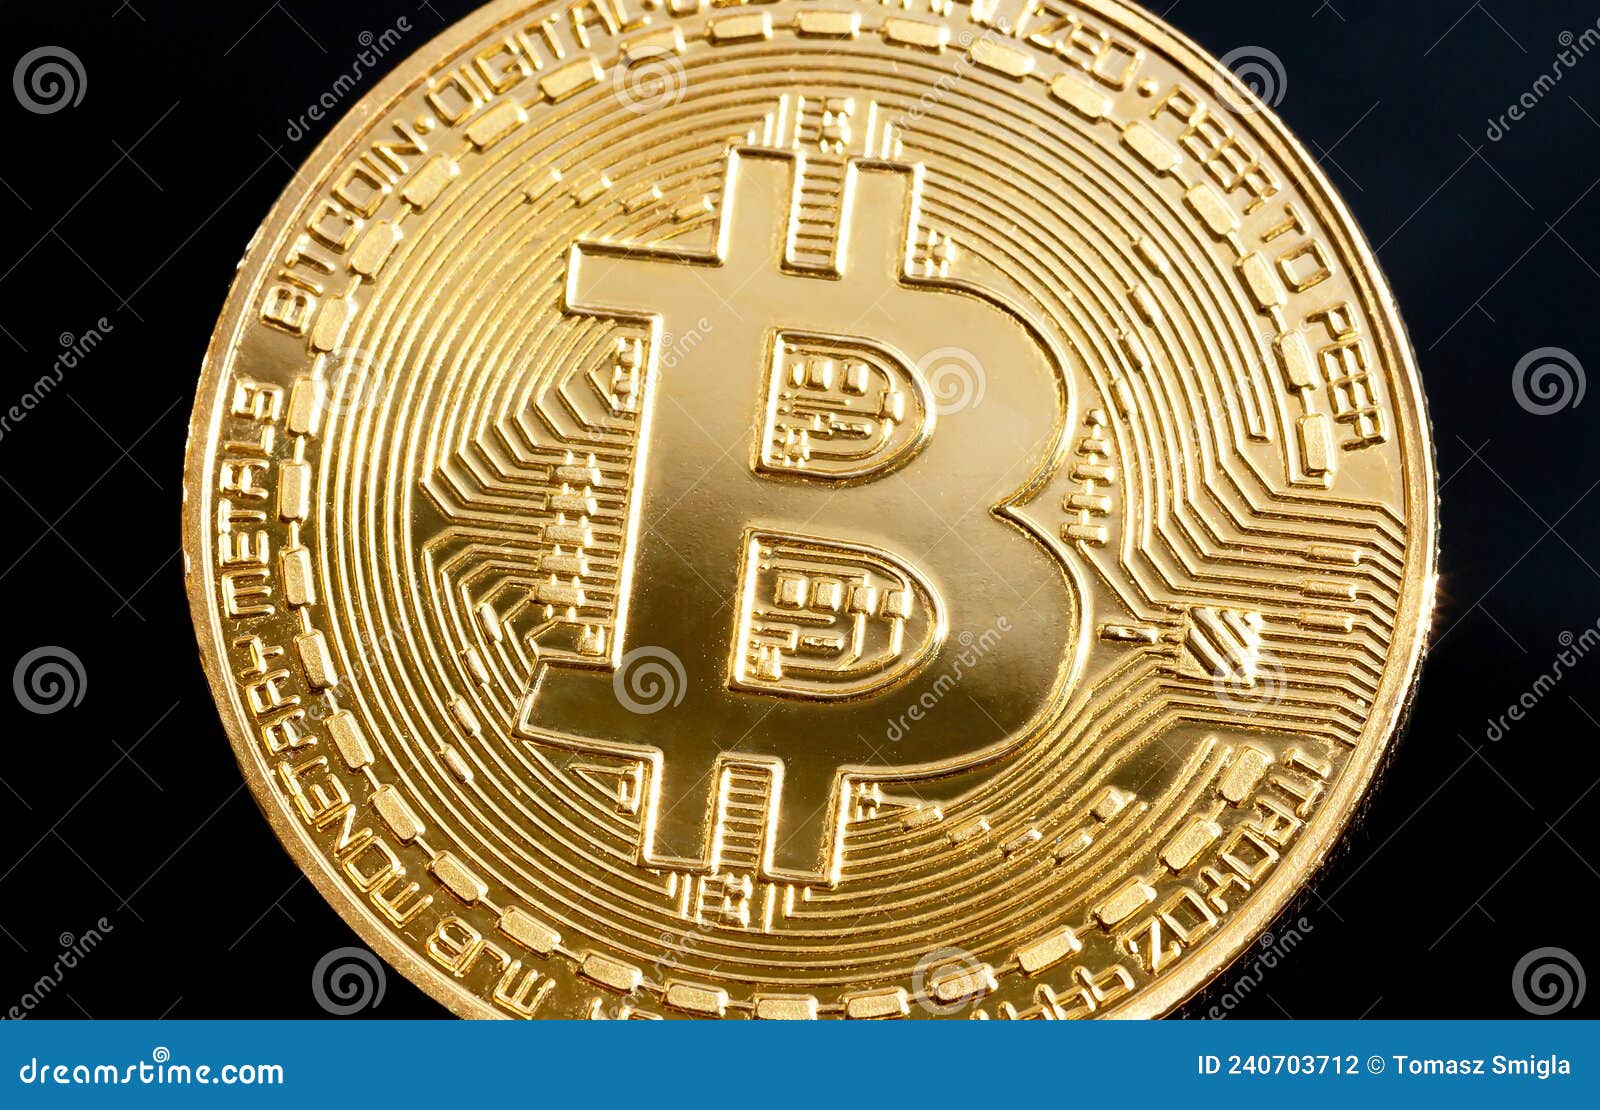 Buy Gold with Bitcoin and other Crypto | coinmag.fun